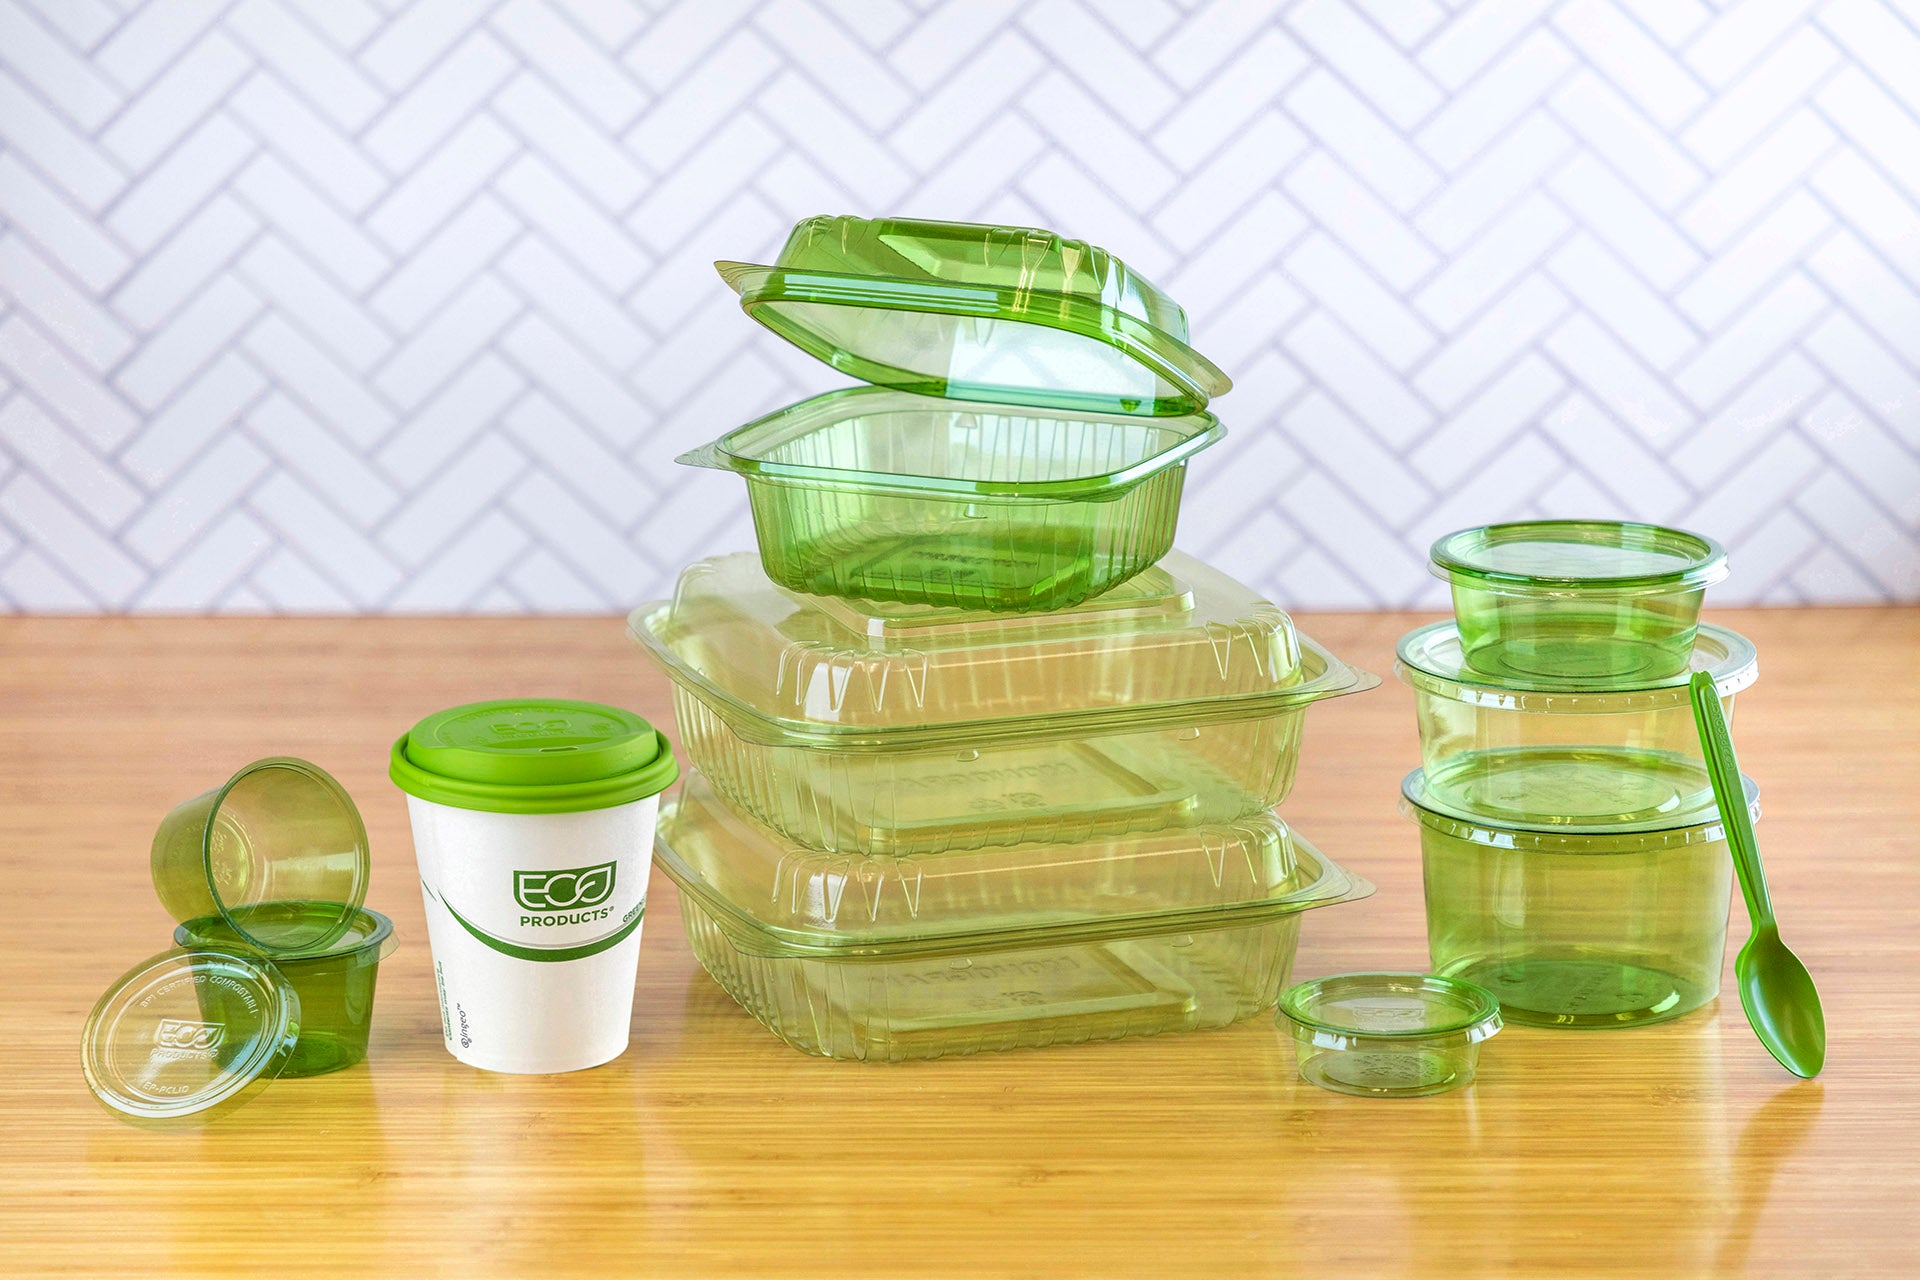 Eco Products food containers